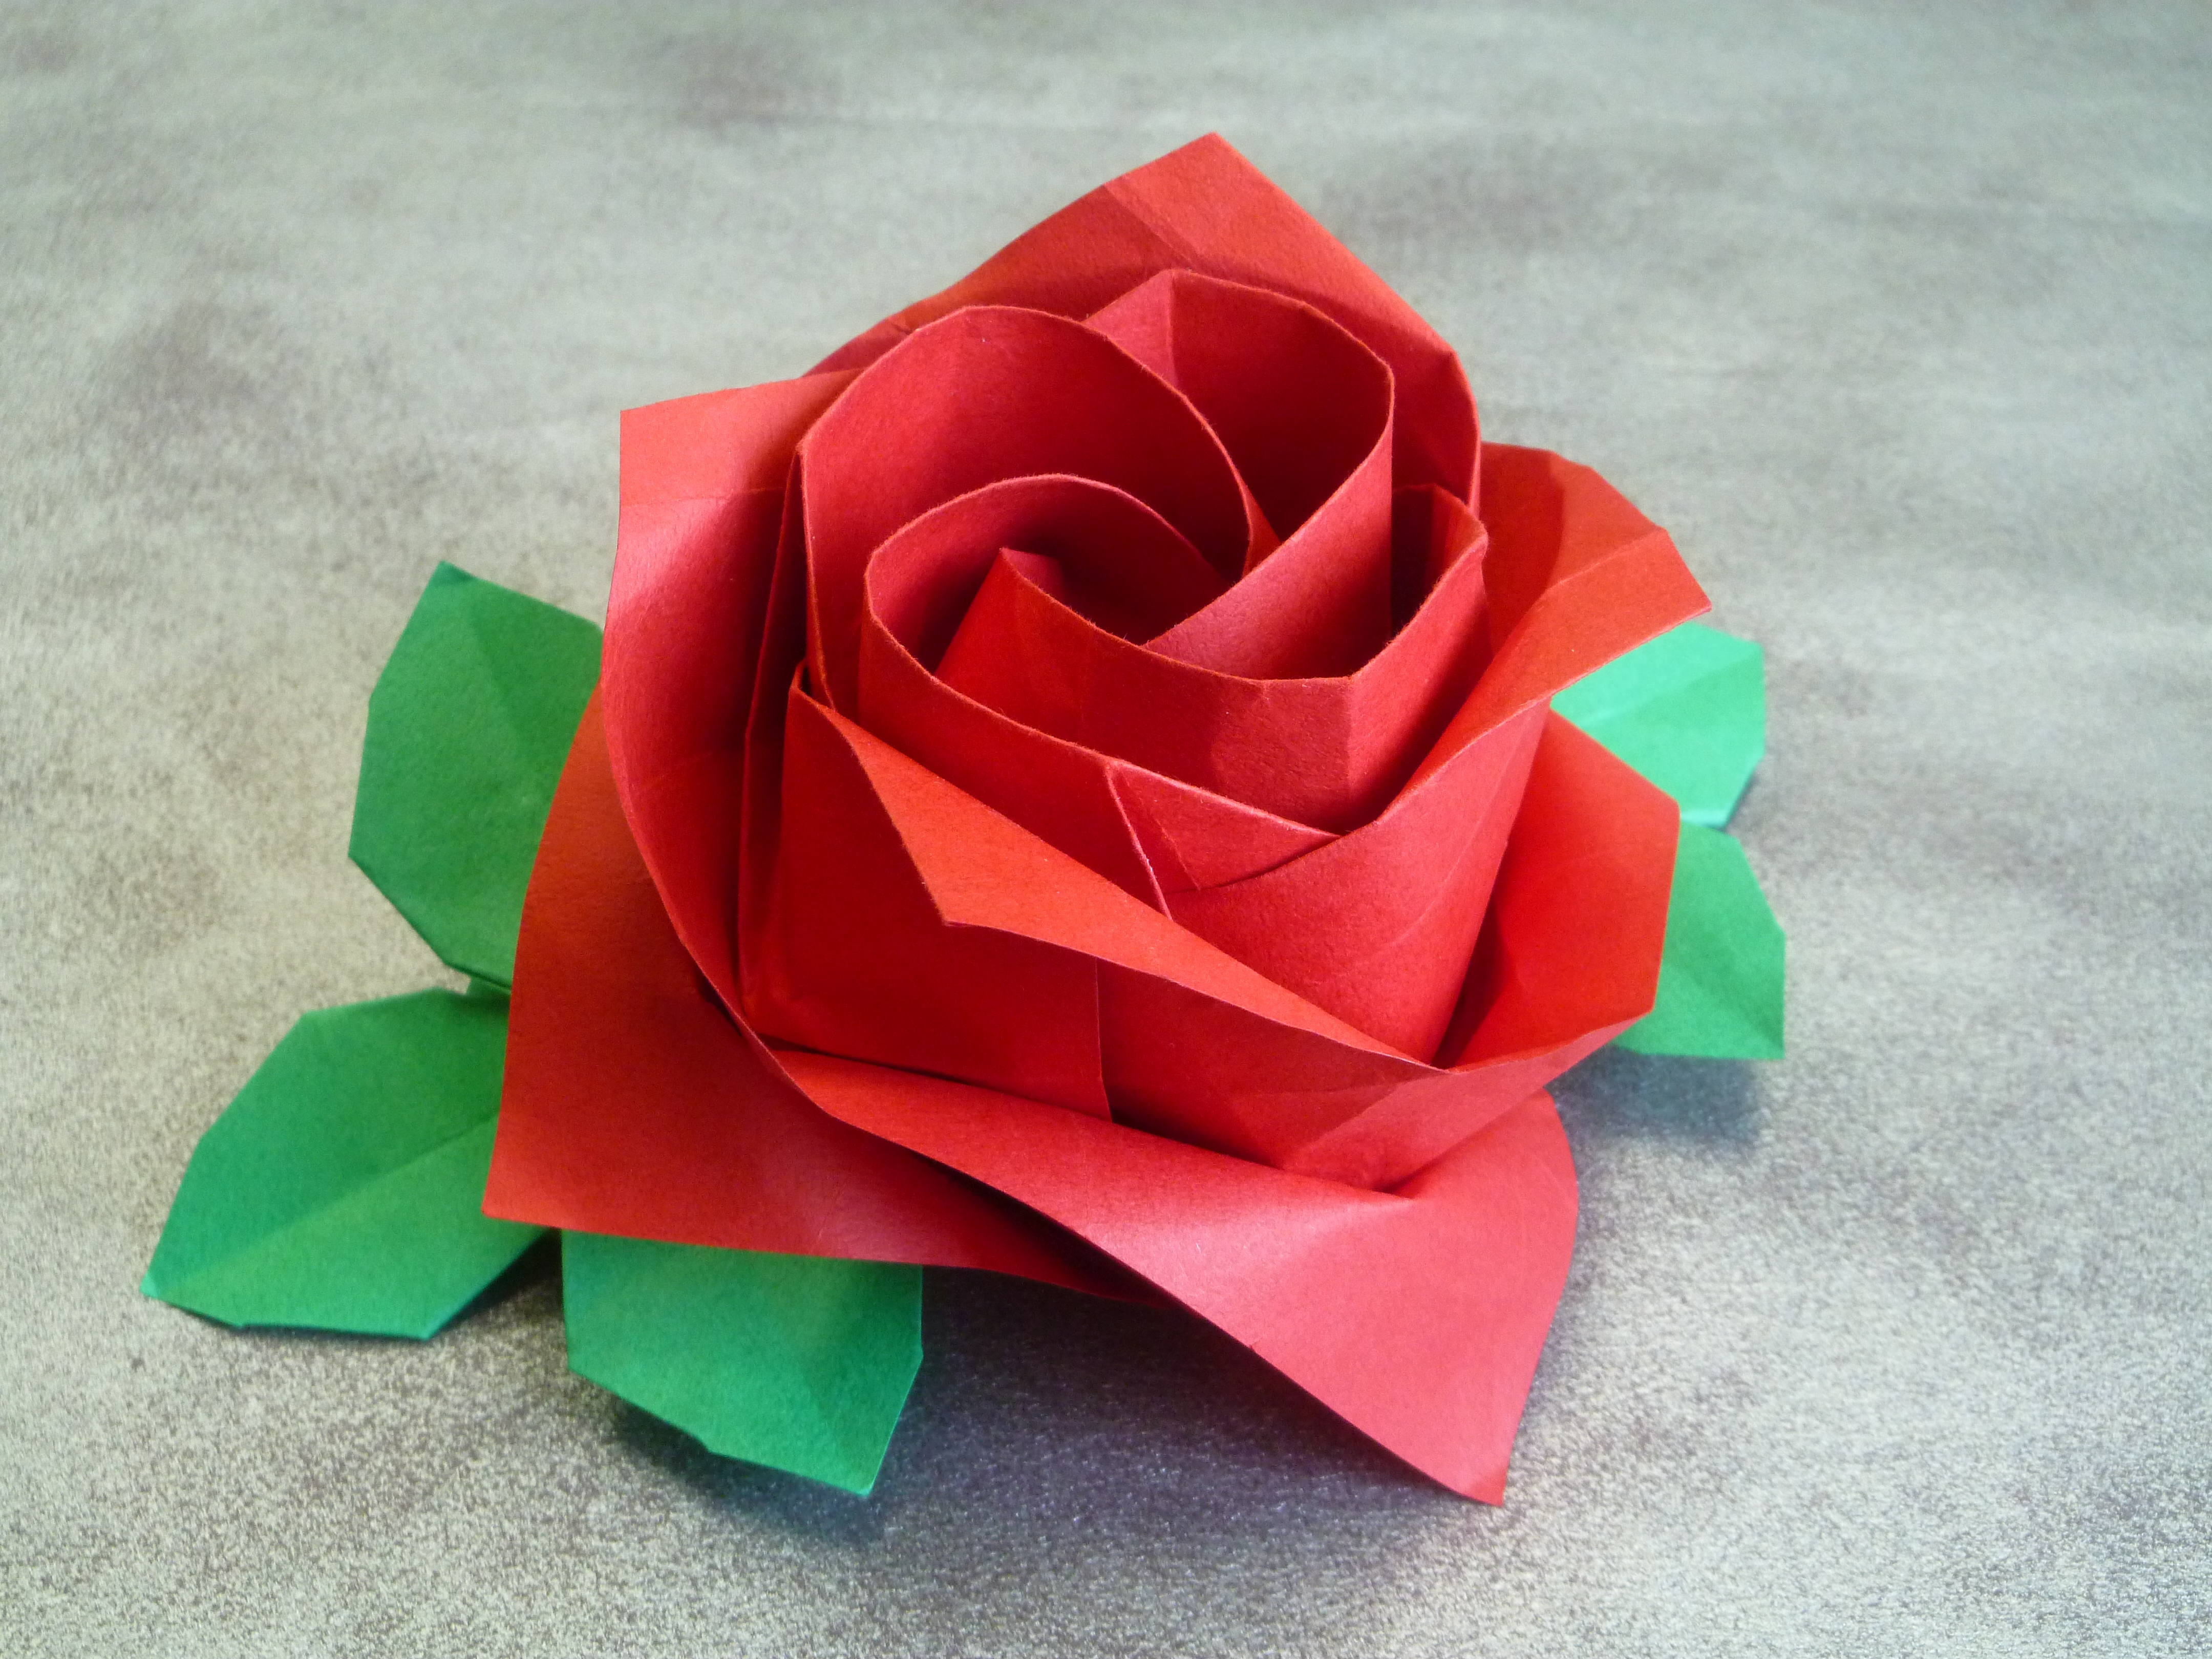 Origami Kawasaki Rose Famous Origami Artists And Their Spectacular Work Part 2 Album